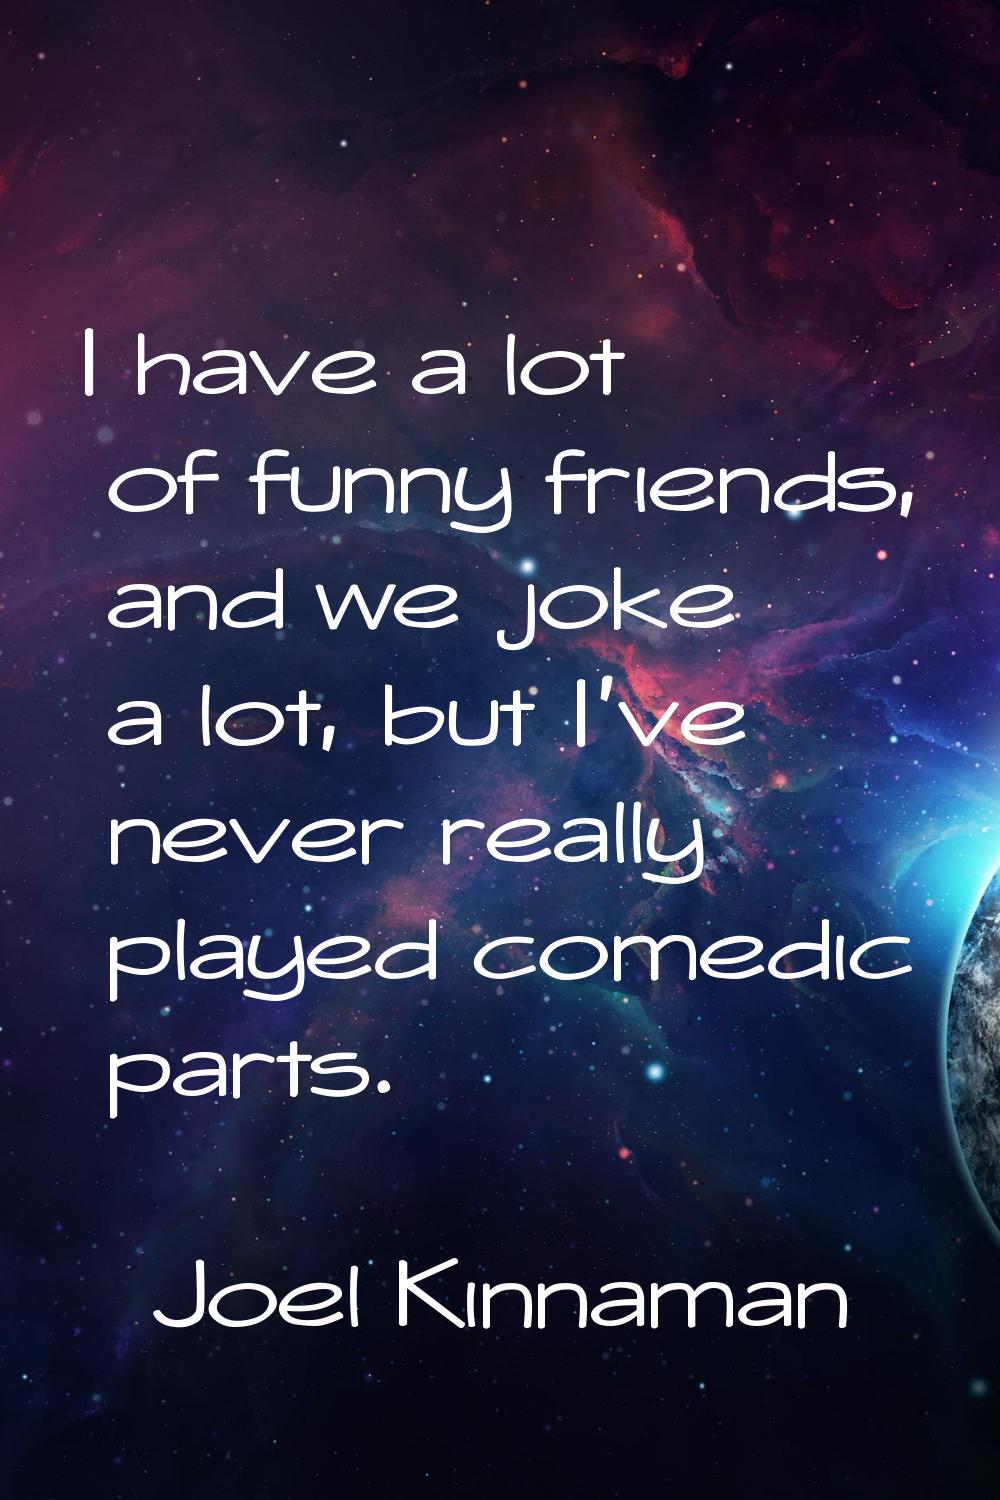 I have a lot of funny friends, and we joke a lot, but I've never really played comedic parts.